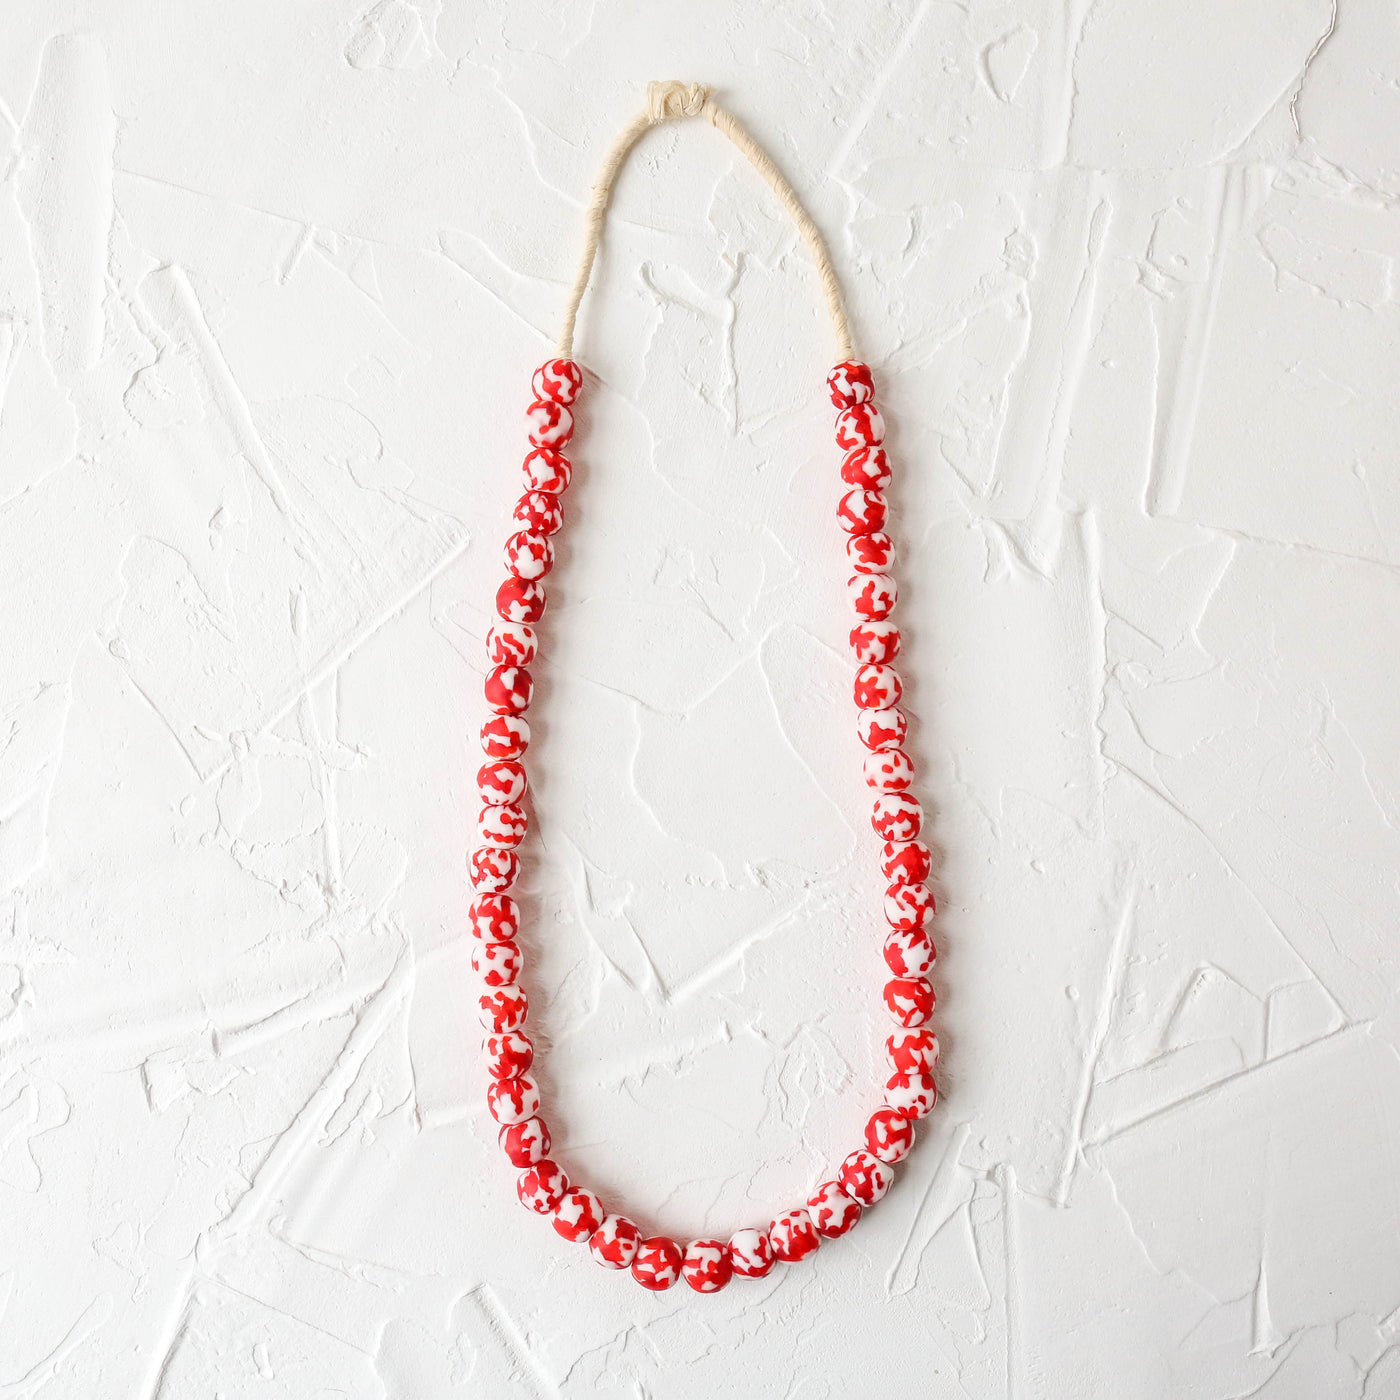 Recycled Glass Beads - 14mm Red & White Patterned